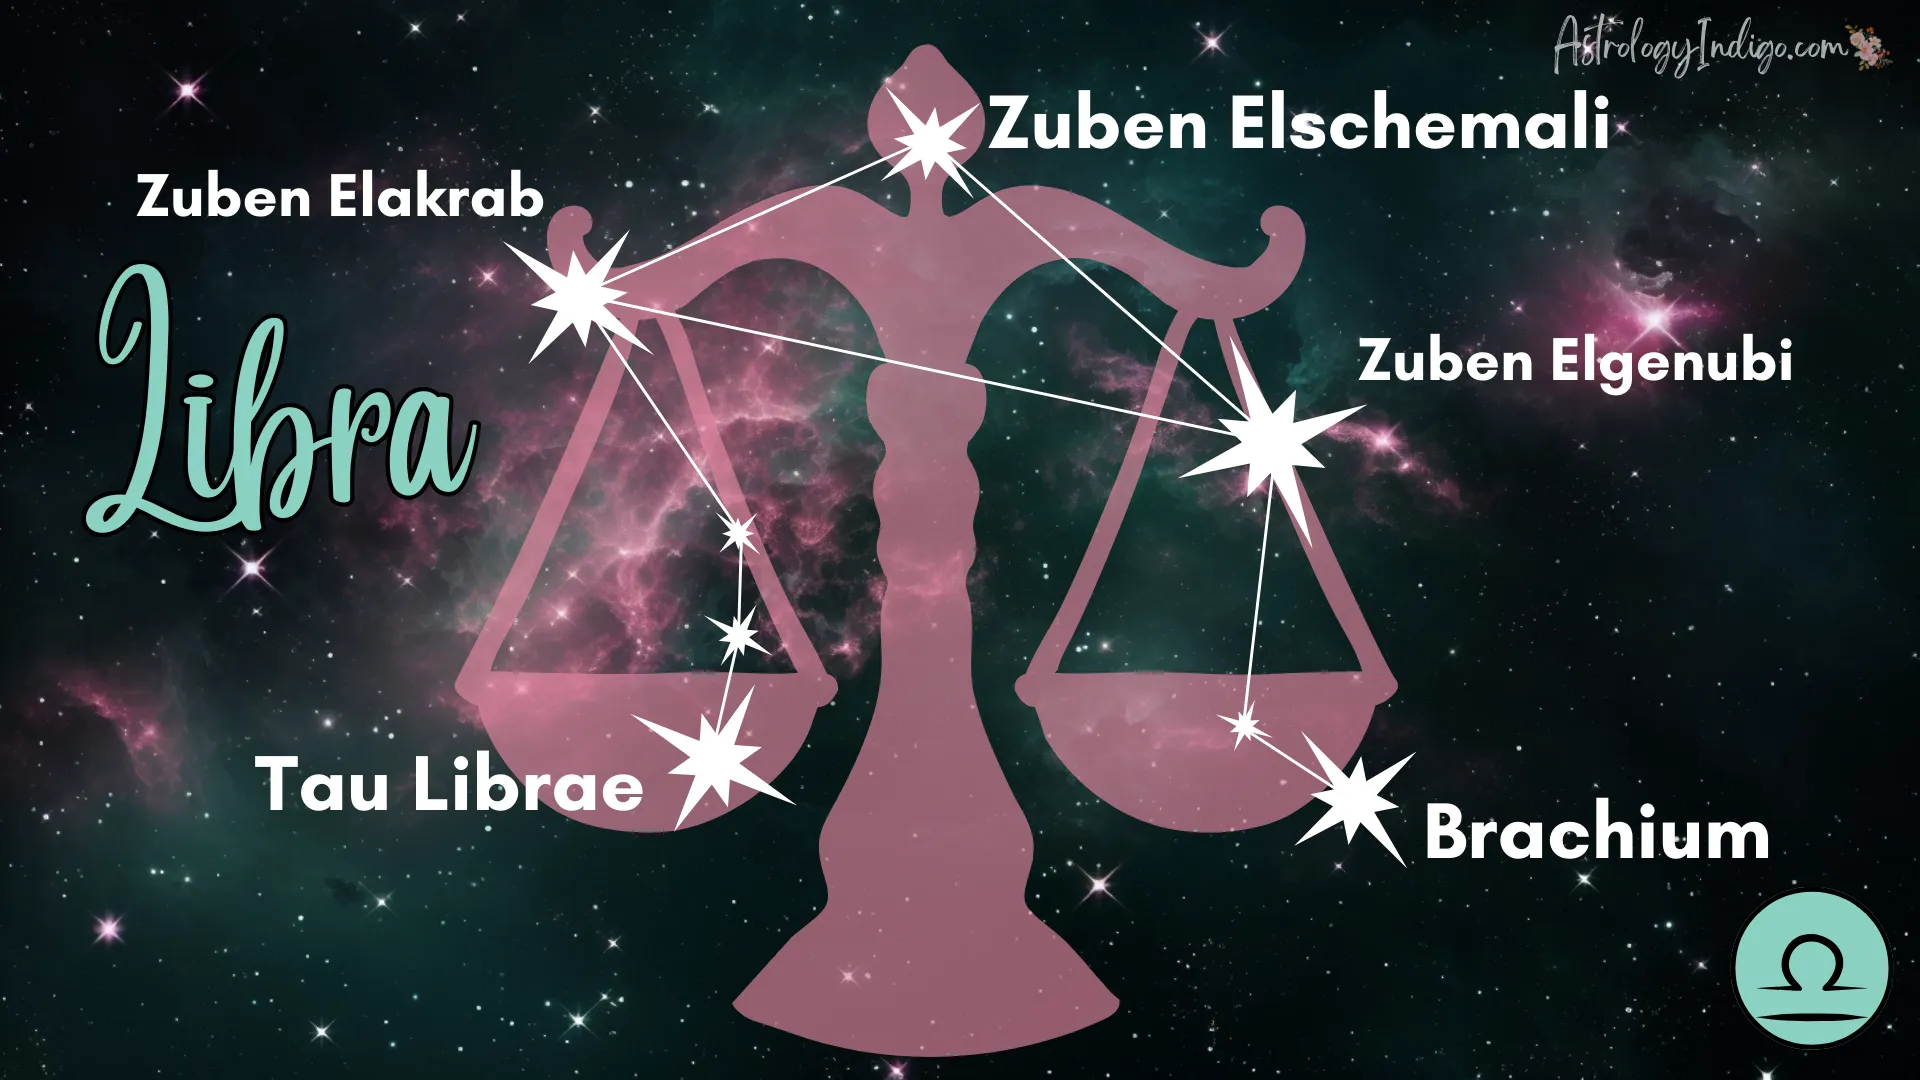 The Libra constellation with information about the stars and a pink image of the Scales of Justice behind it.